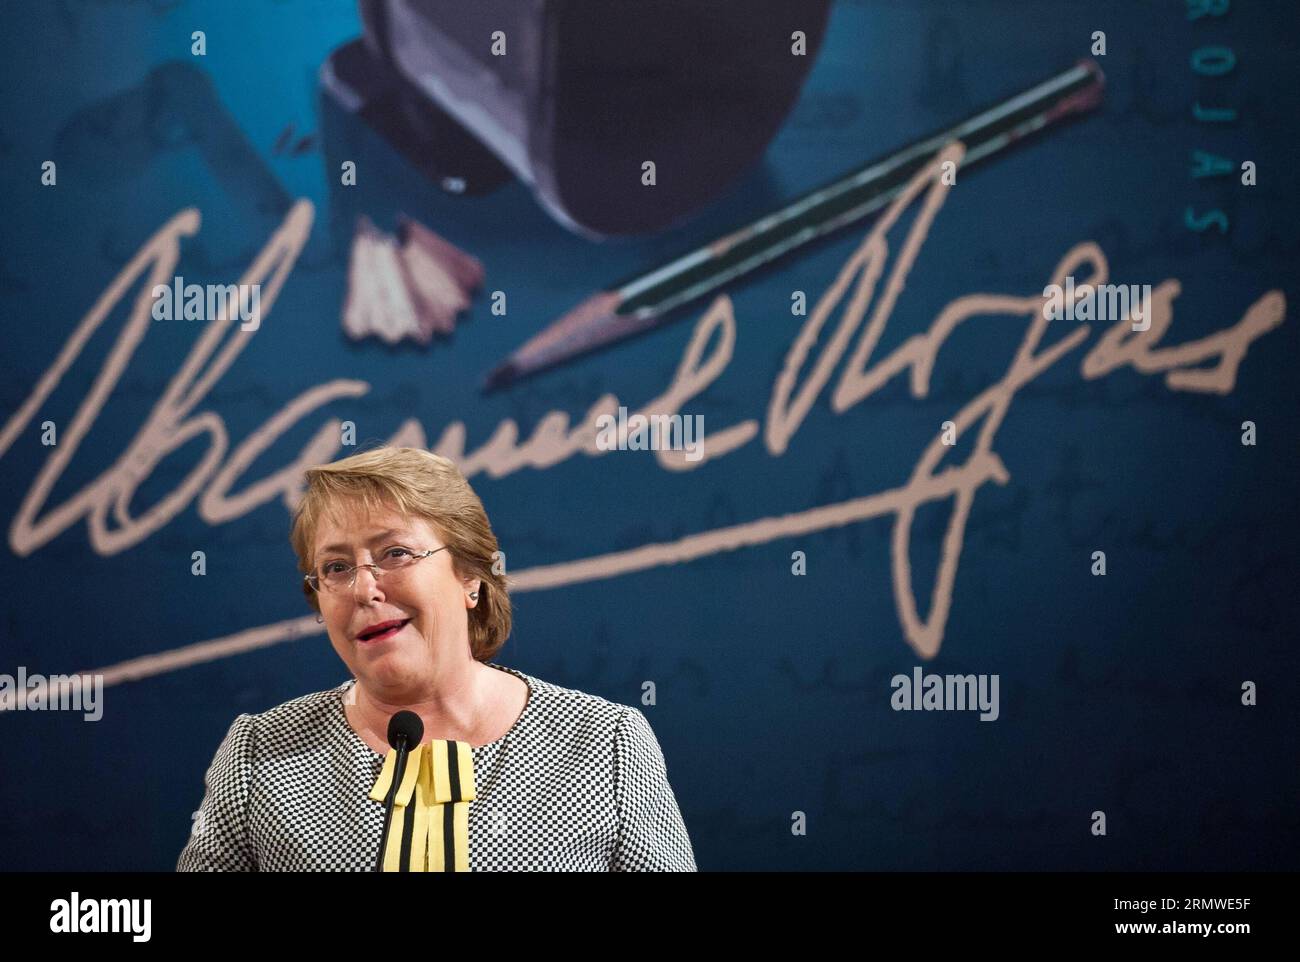 Chilean President Michelle Bachelet delivers a speech during a ceremony for the Manuel Rojas Ibero-american Narrative Award winner Horacio Castellanos Moya, a Salvadorean writter, in the Moneda Palace, Santiago, capital of Chile, on Oct. 24, 2014. Jorge Villegas) (da) CHILE-SANTIAGO-NARRATIVE-AWARDING CEREMONY e JORGExVILLEGAS PUBLICATIONxNOTxINxCHN   Chilean President Michelle Bachelet delivers a Speech during a Ceremony for The Manuel Rojas Ibero American  Award Winner Horacio Castellanos Moya a Salvadorean Writter in The Moneda Palace Santiago Capital of Chile ON OCT 24 2014 Jorge Villegas Stock Photo